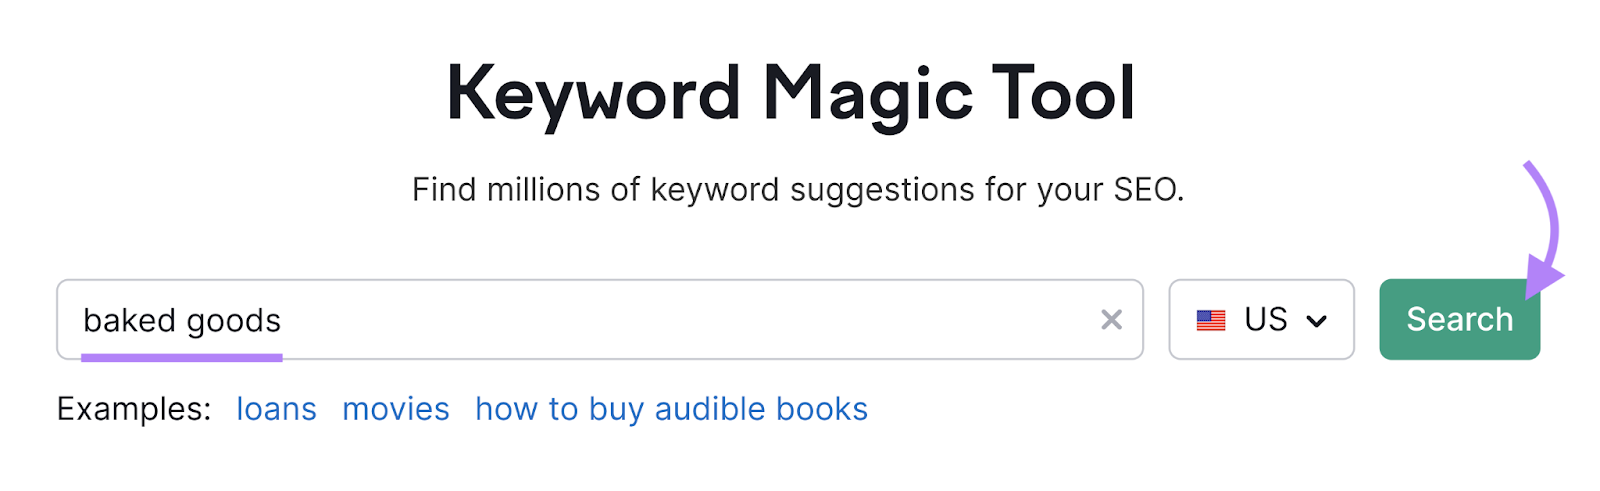 Keyword Magic Tool search bar with “baked goods” entered.